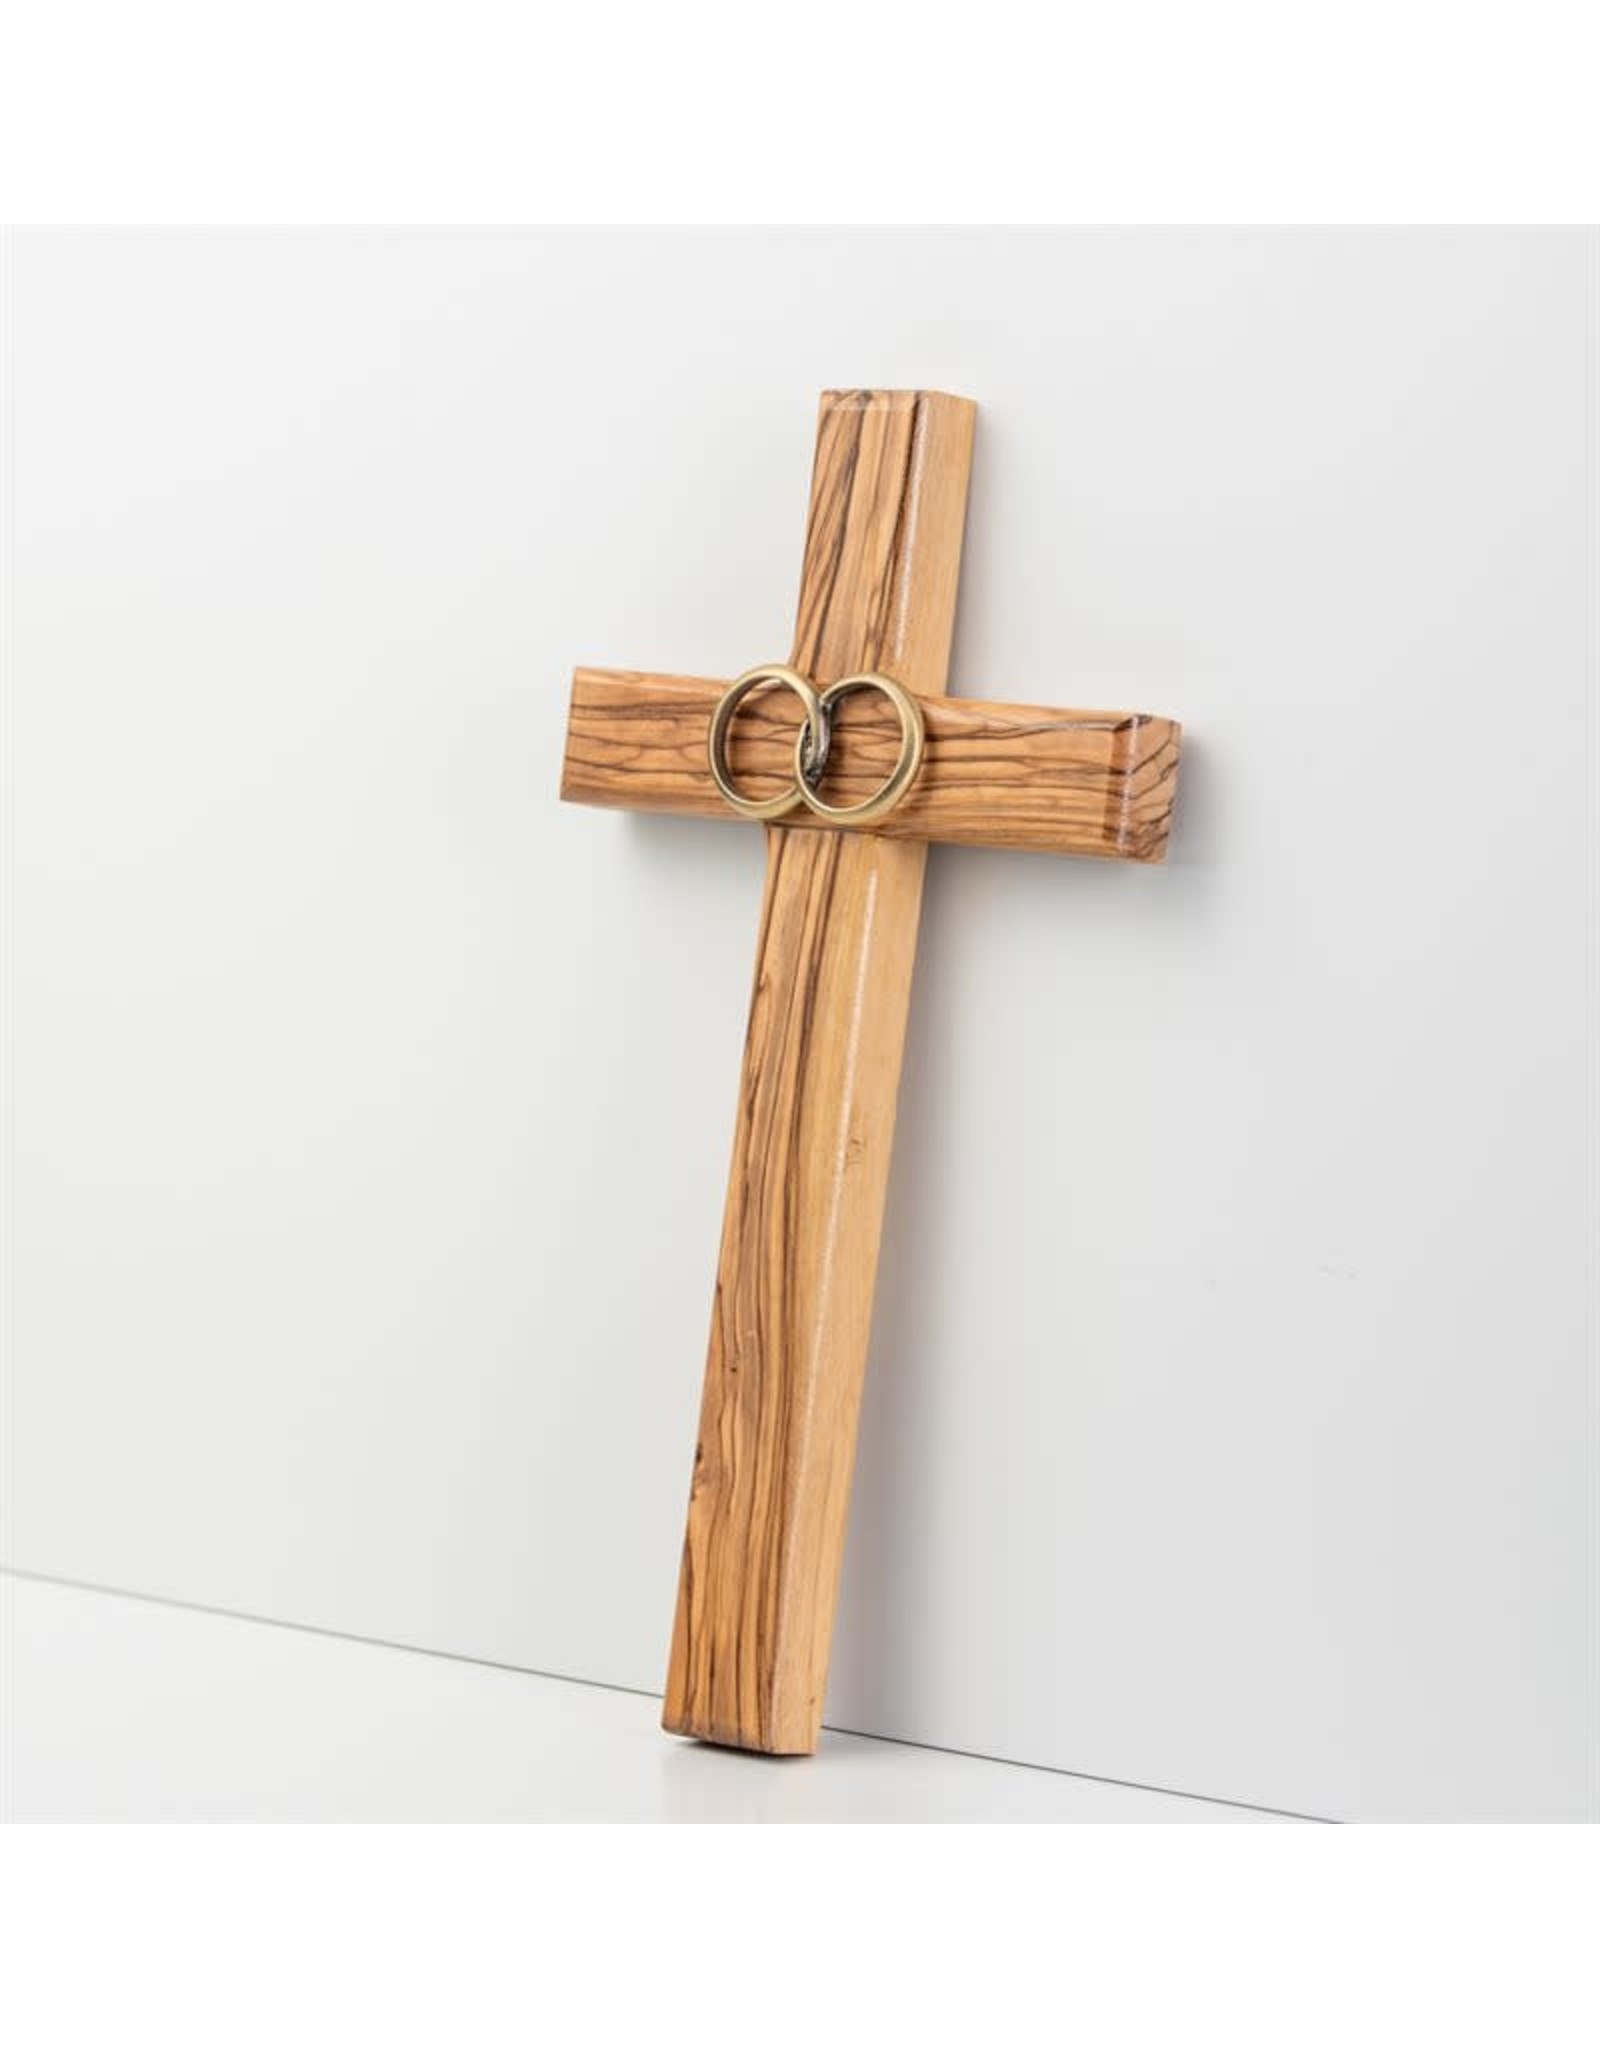 Shomali Wedding Cross made of Olive Wood from the Holy Land (8")